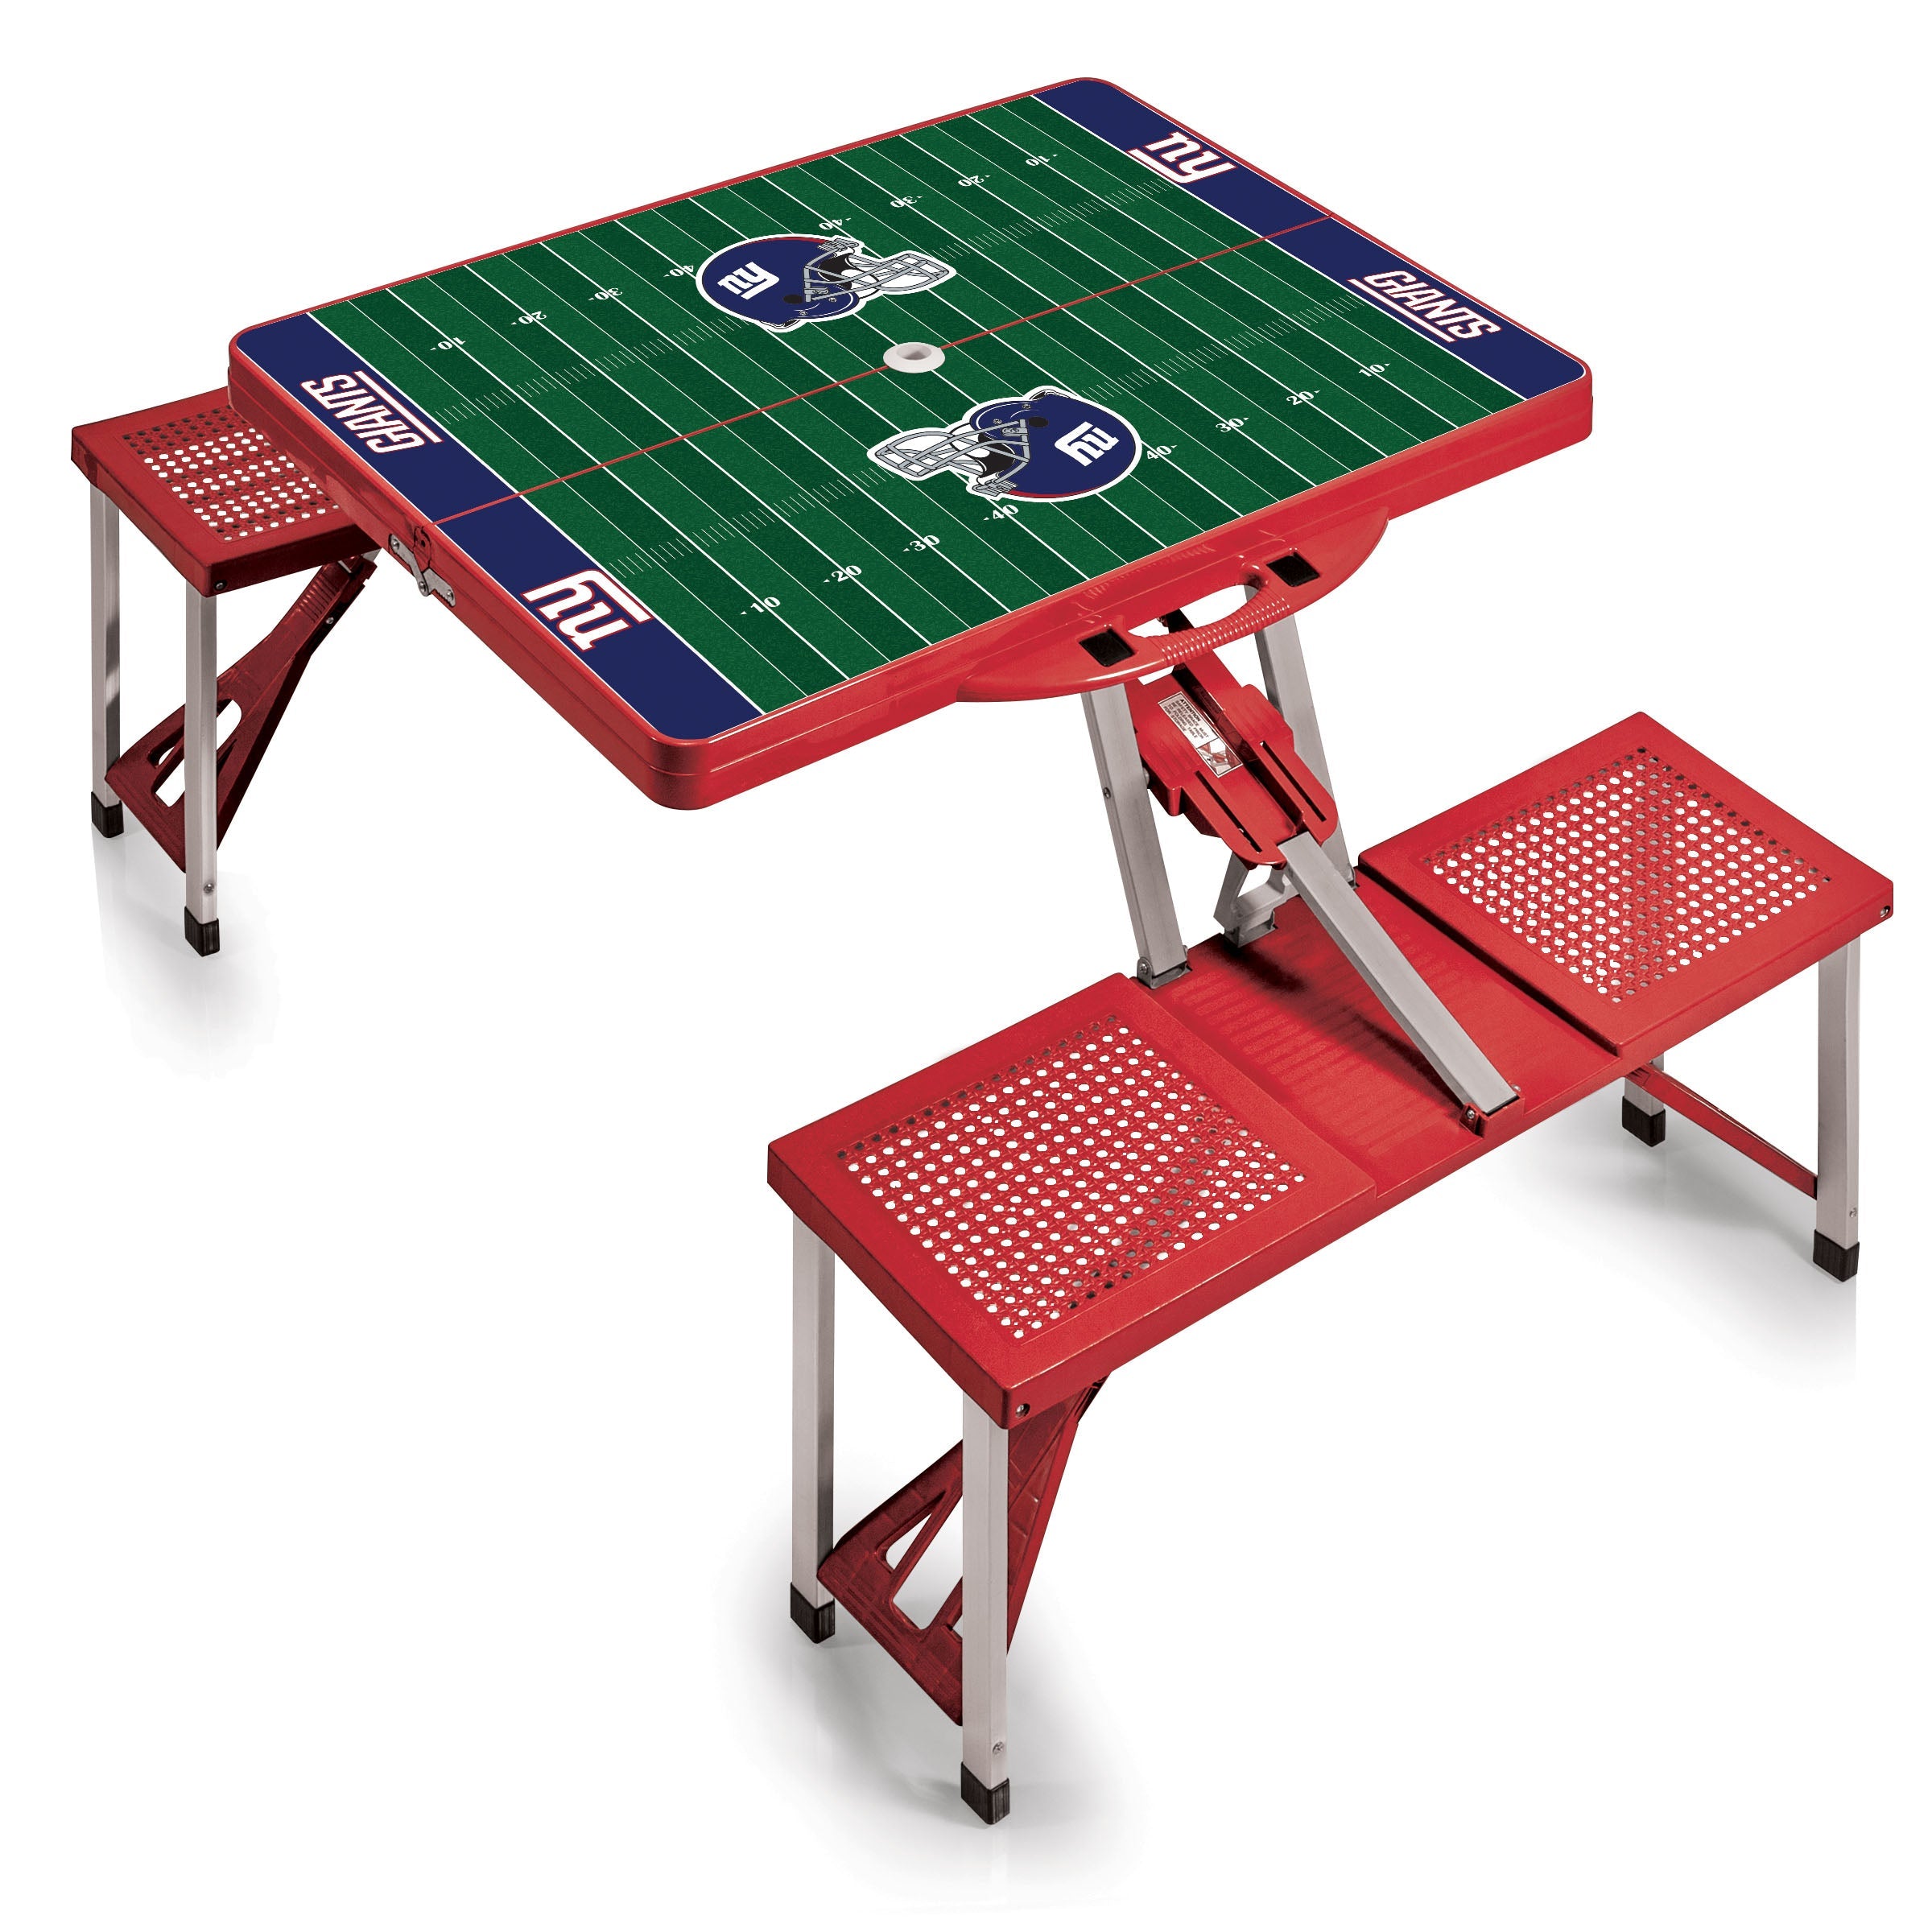 Football Field - New York Giants - Picnic Table Portable Folding Table with Seats